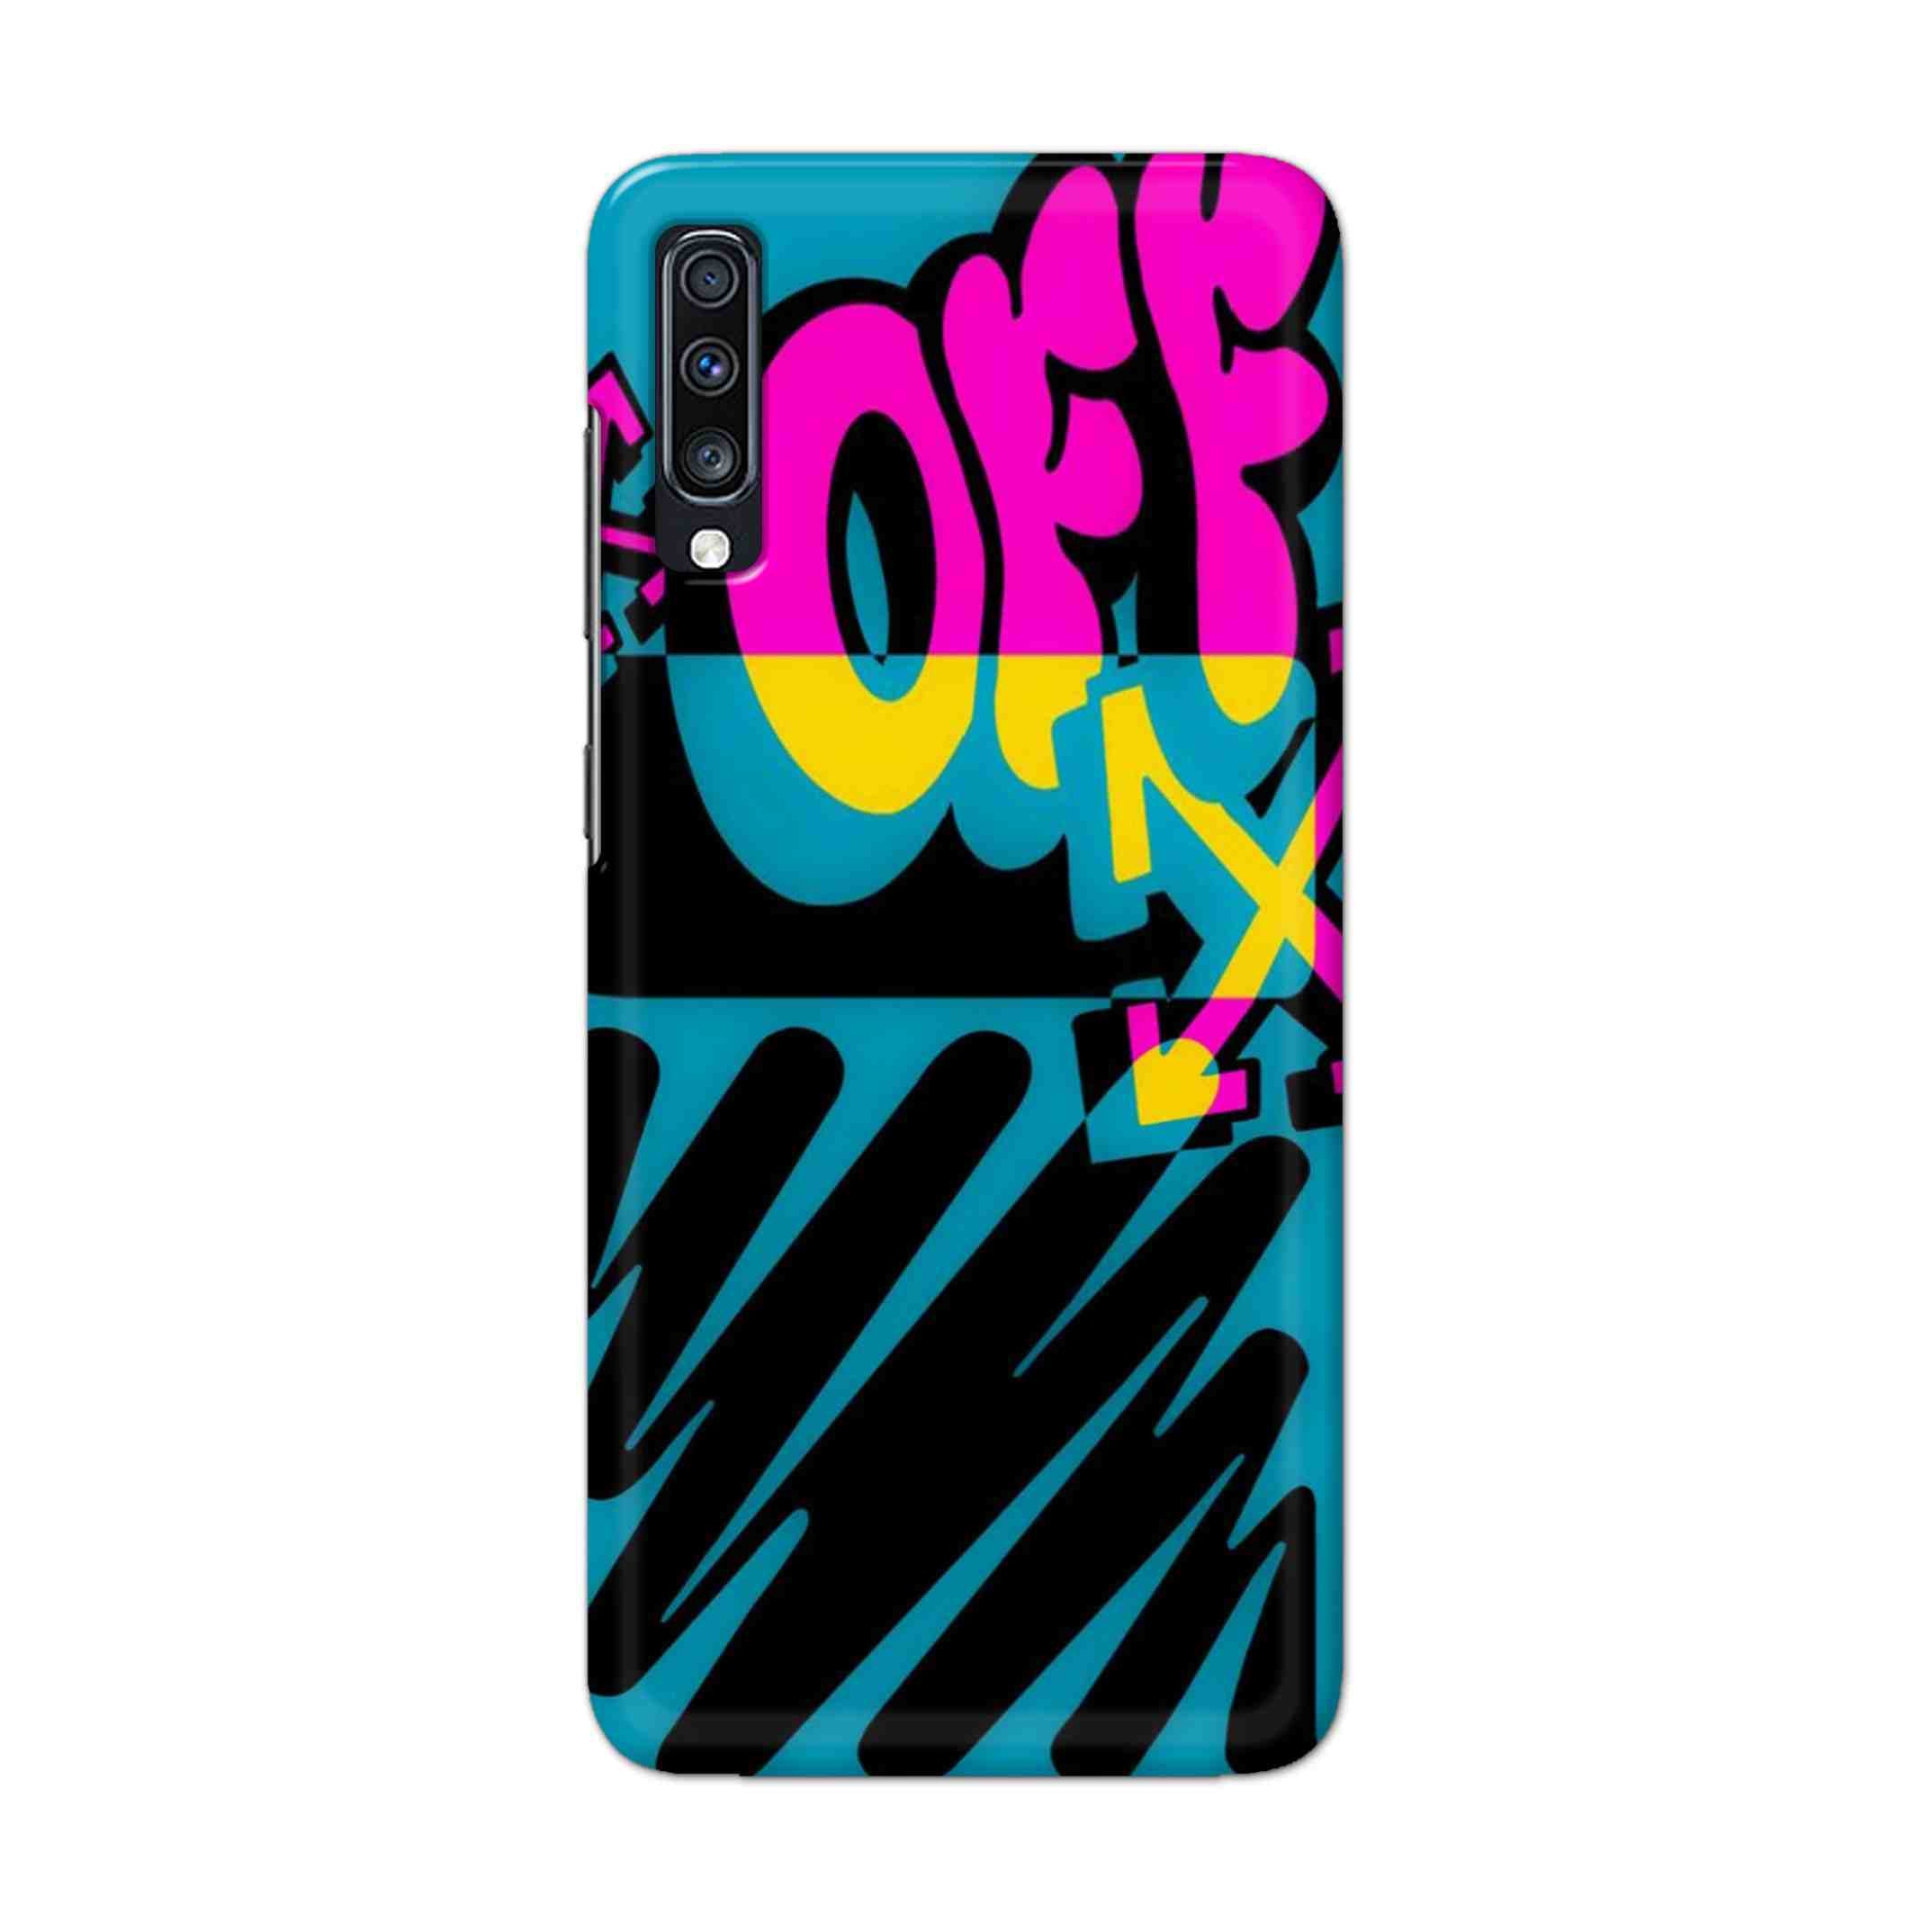 Buy Off Hard Back Mobile Phone Case Cover For Samsung Galaxy A70 Online